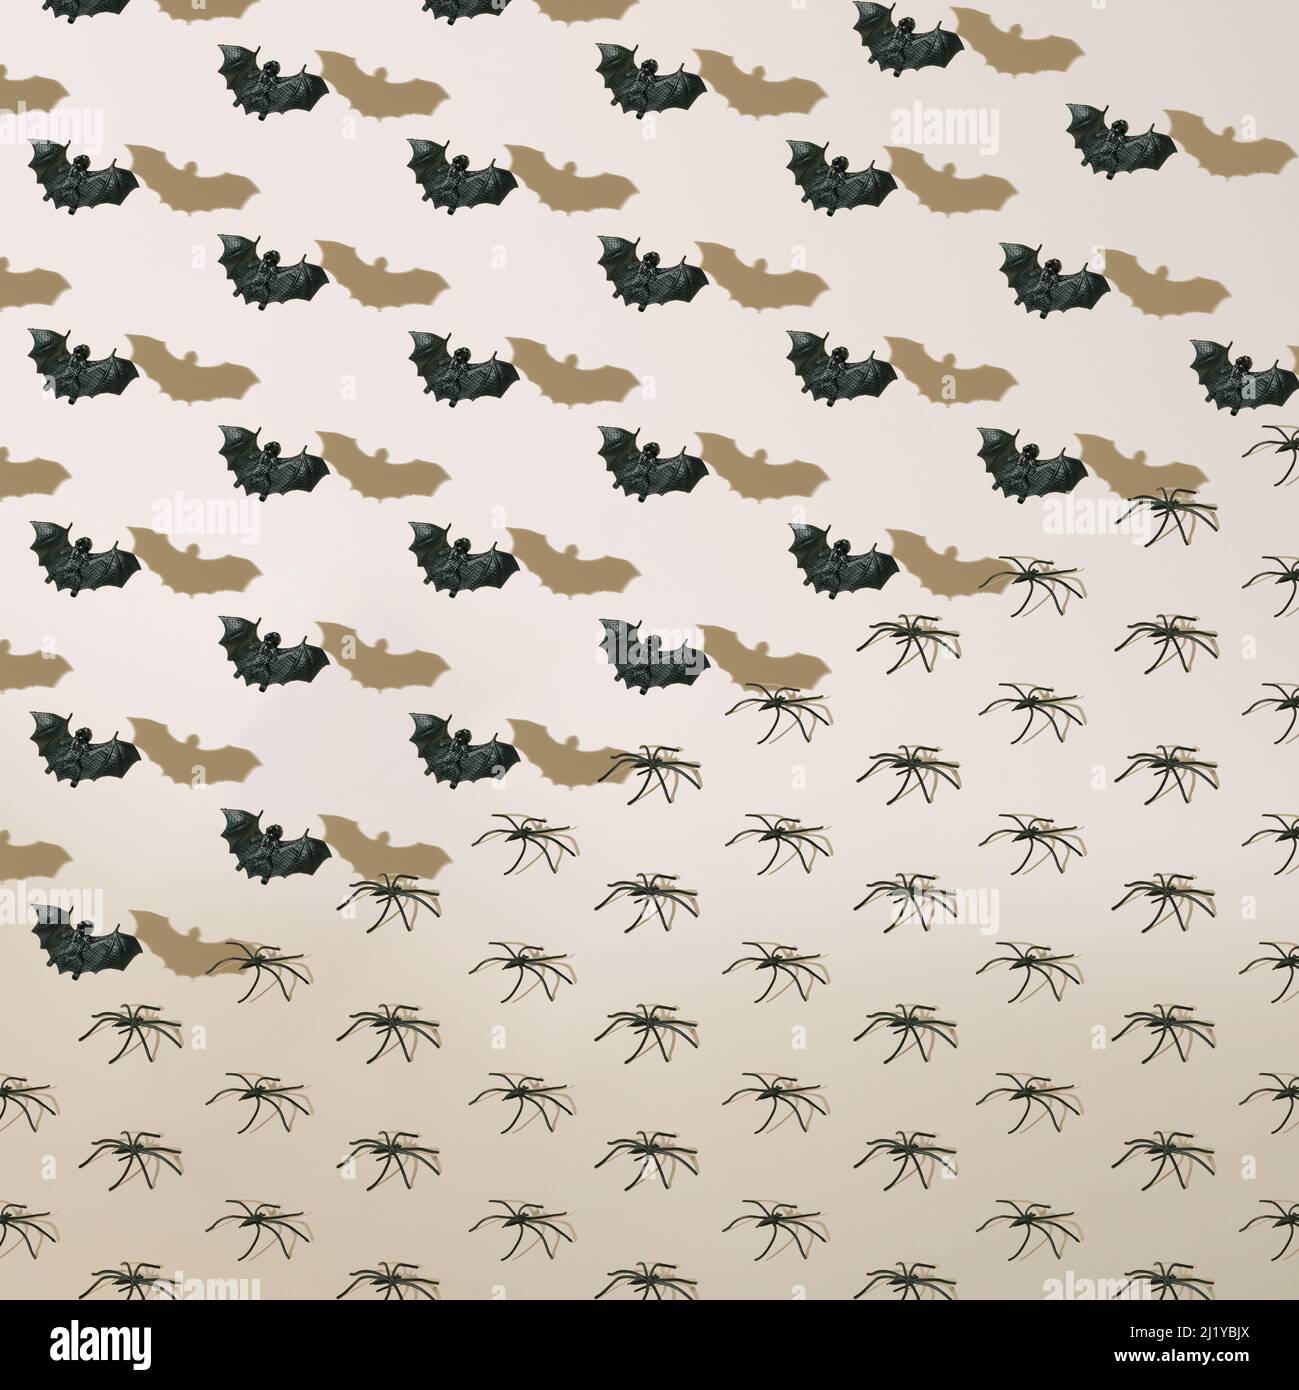 Halloween pattern of black flying bats and poisonous spiders with shadows on neutral beige background. Stock Photo